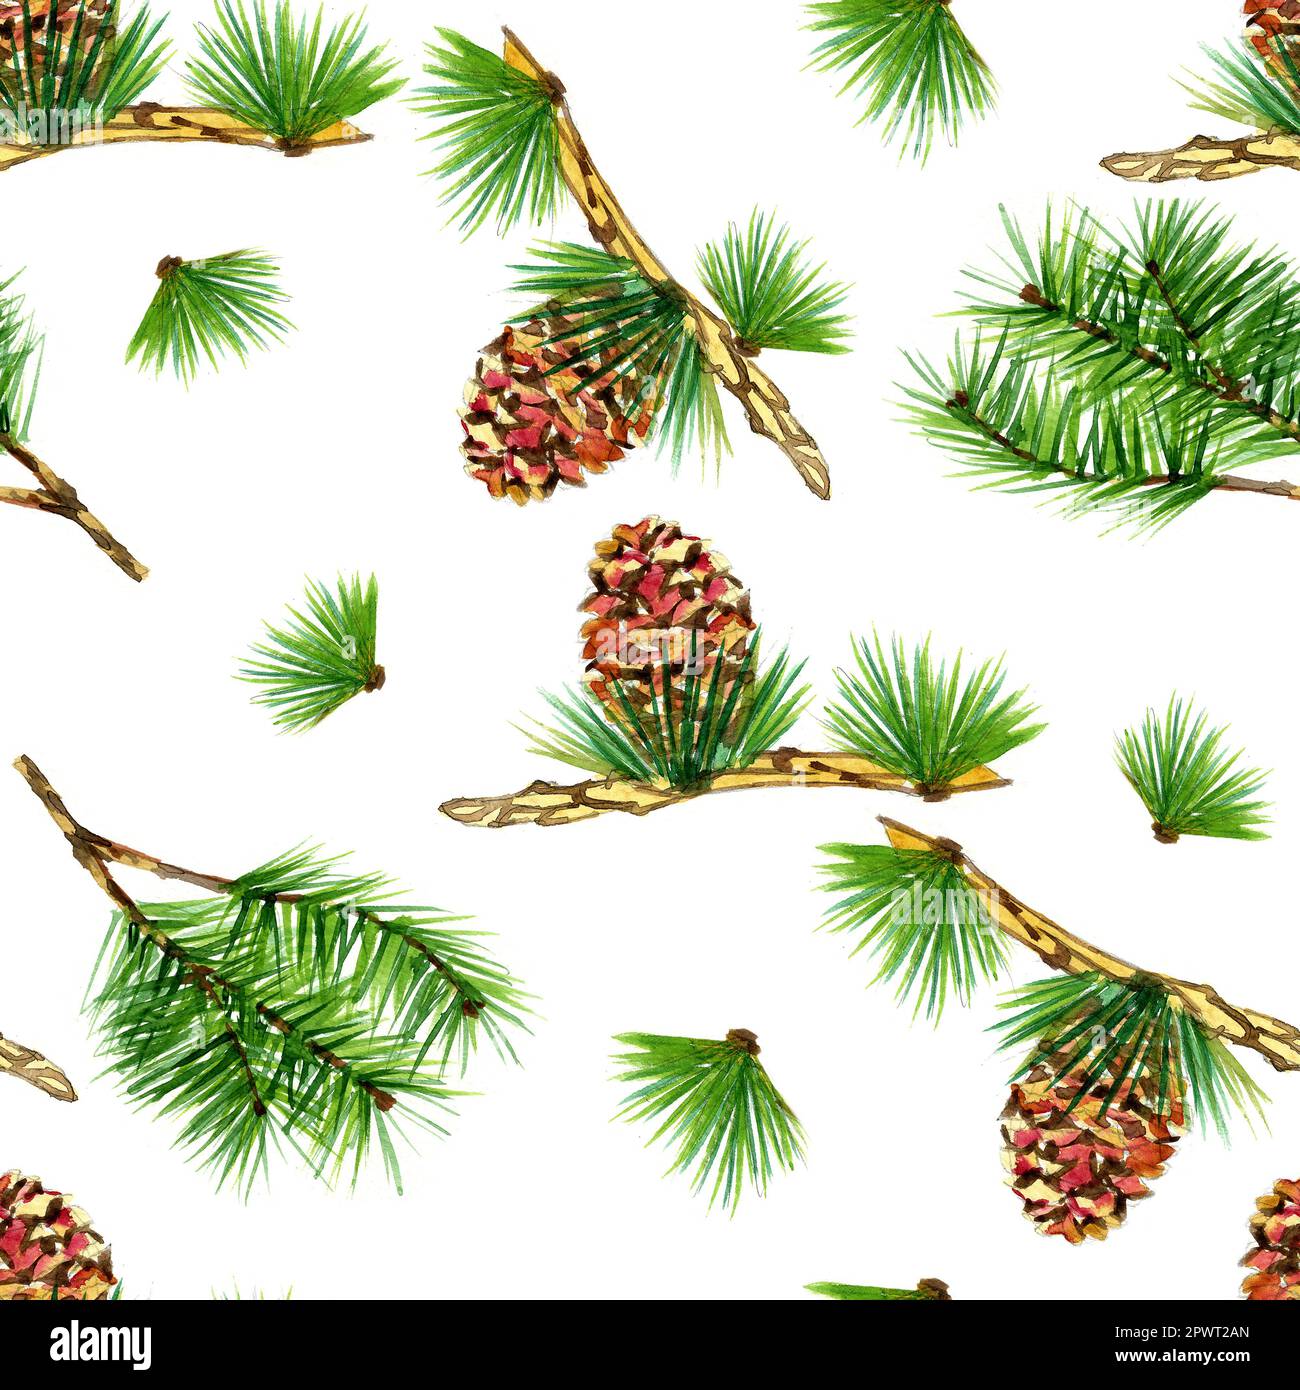 Watercolor pine seamless pattern on white background Stock Photo